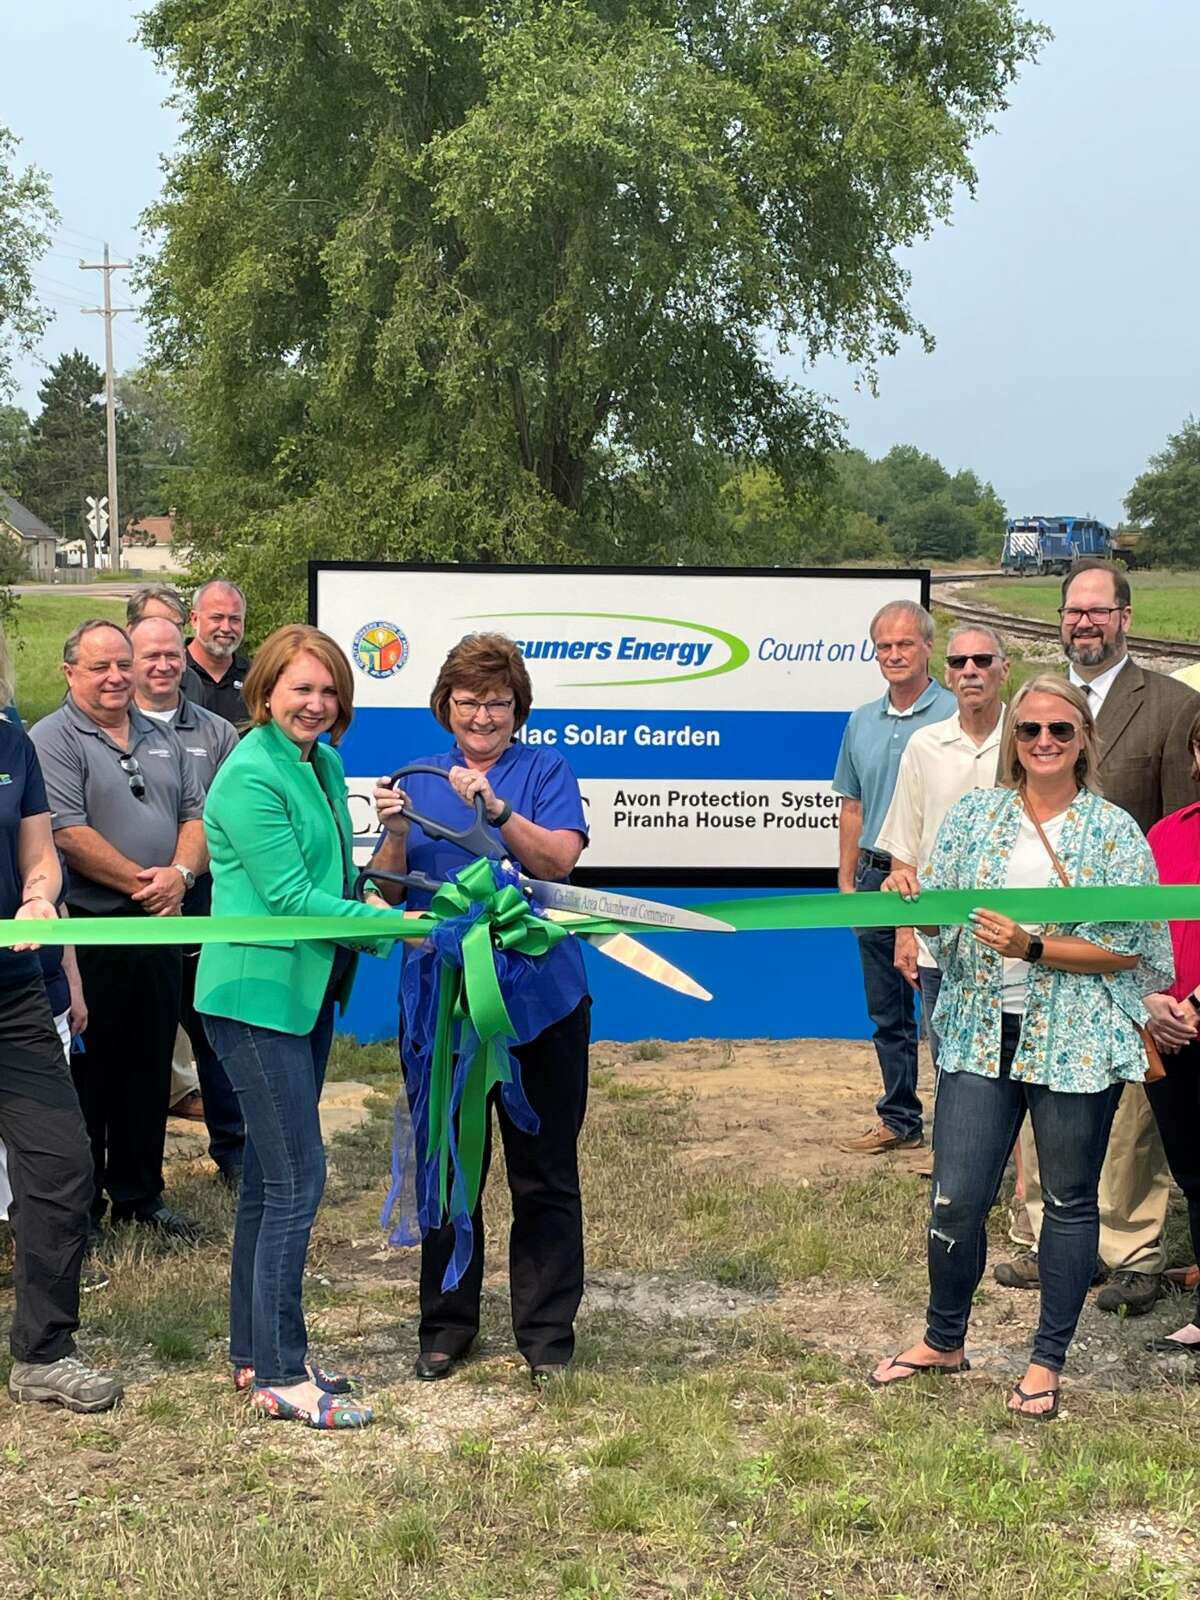 Front, from left, Consumer Energy VP of Costumer Experience Lauren Youngdahl Snyder, joins the mayor of Cadillac, Carla Filkins, to cut the Cadillac Solar Gardens ribbon. Also pictured are other leaders from Consumers Energy, the State of Michigan and the City of Cadillac.